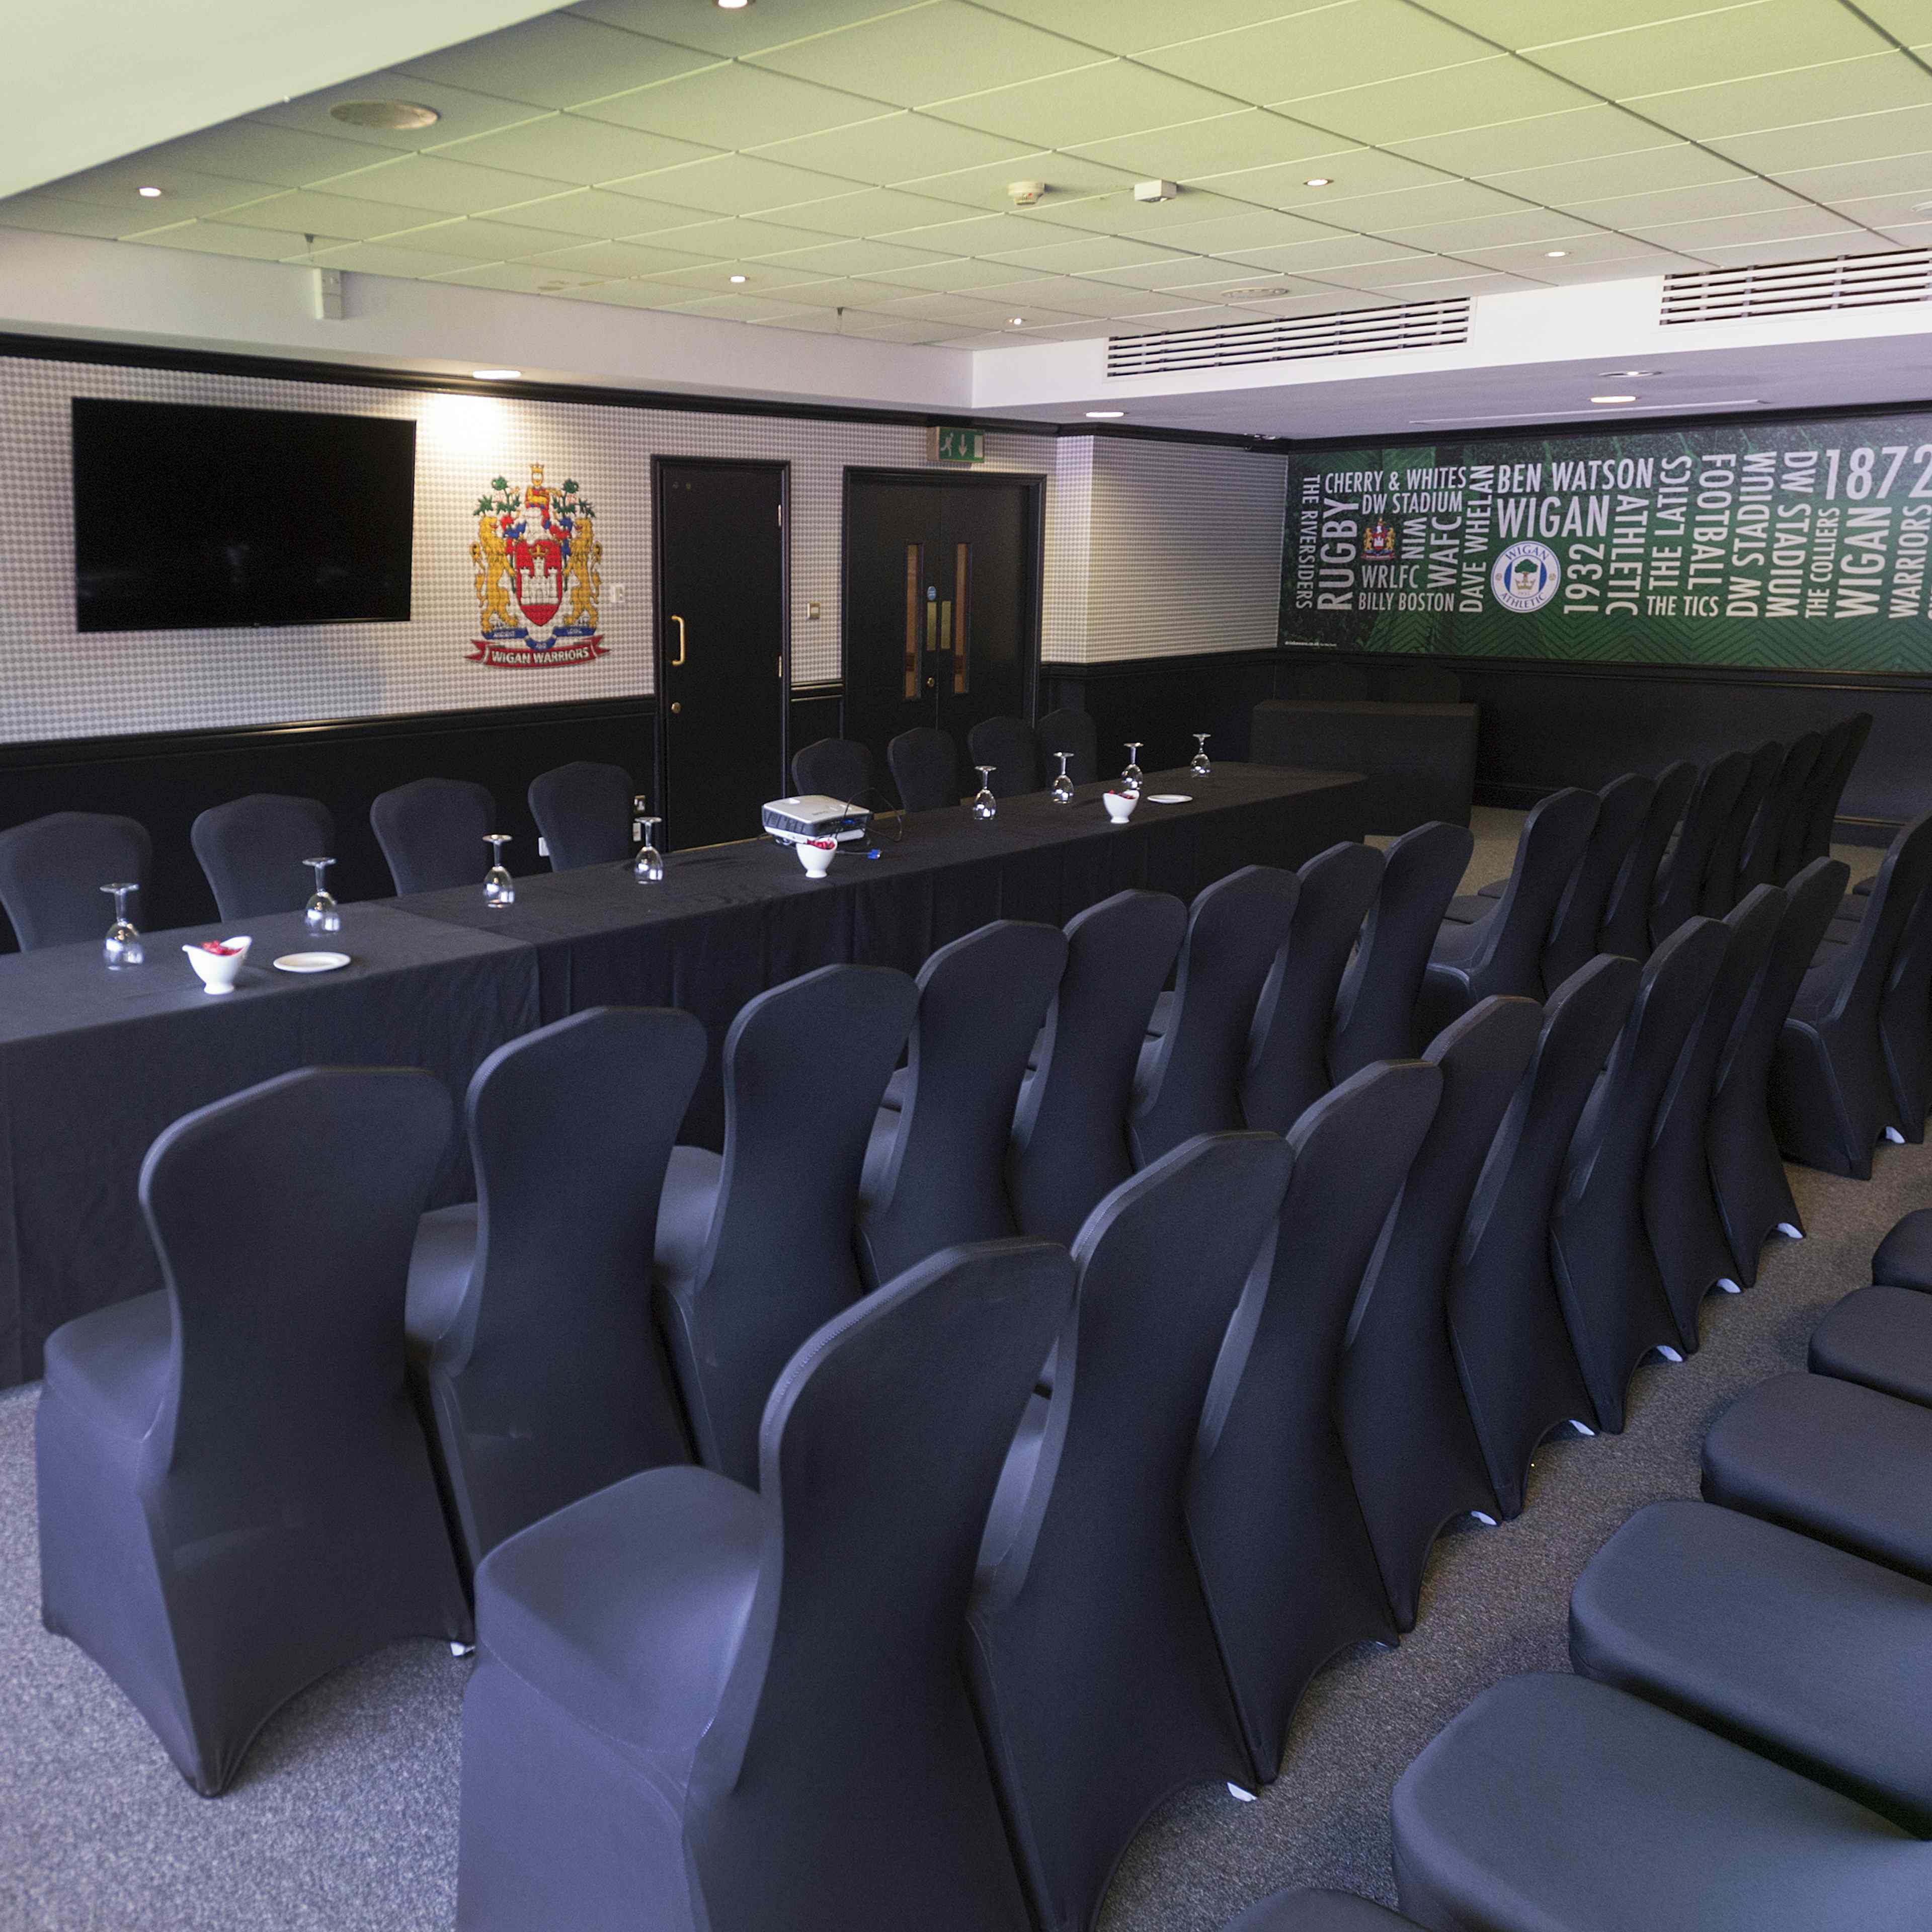 The DW Stadium - The Carling Lounge image 2